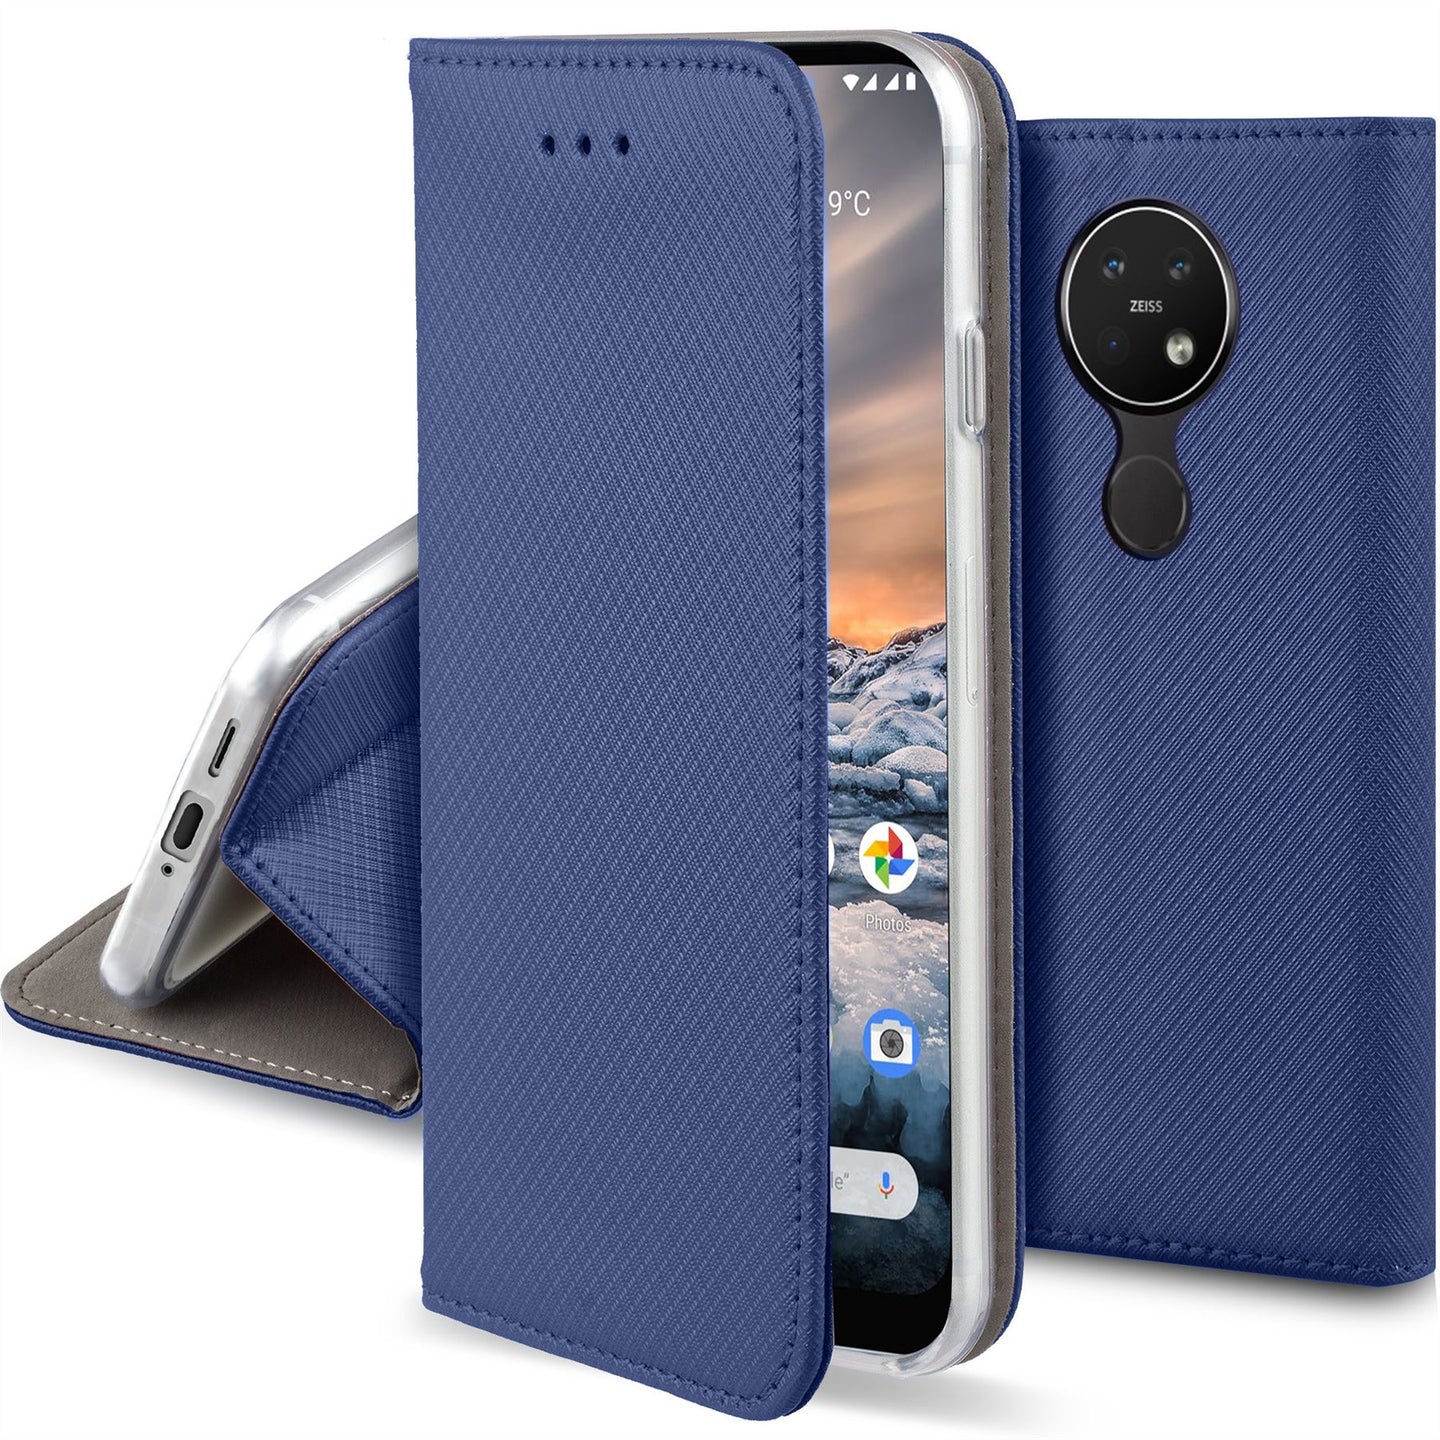 Moozy Case Flip Cover for Nokia 7.2, Nokia 6.2, Dark Blue - Smart Magnetic Flip Case with Card Holder and Stand